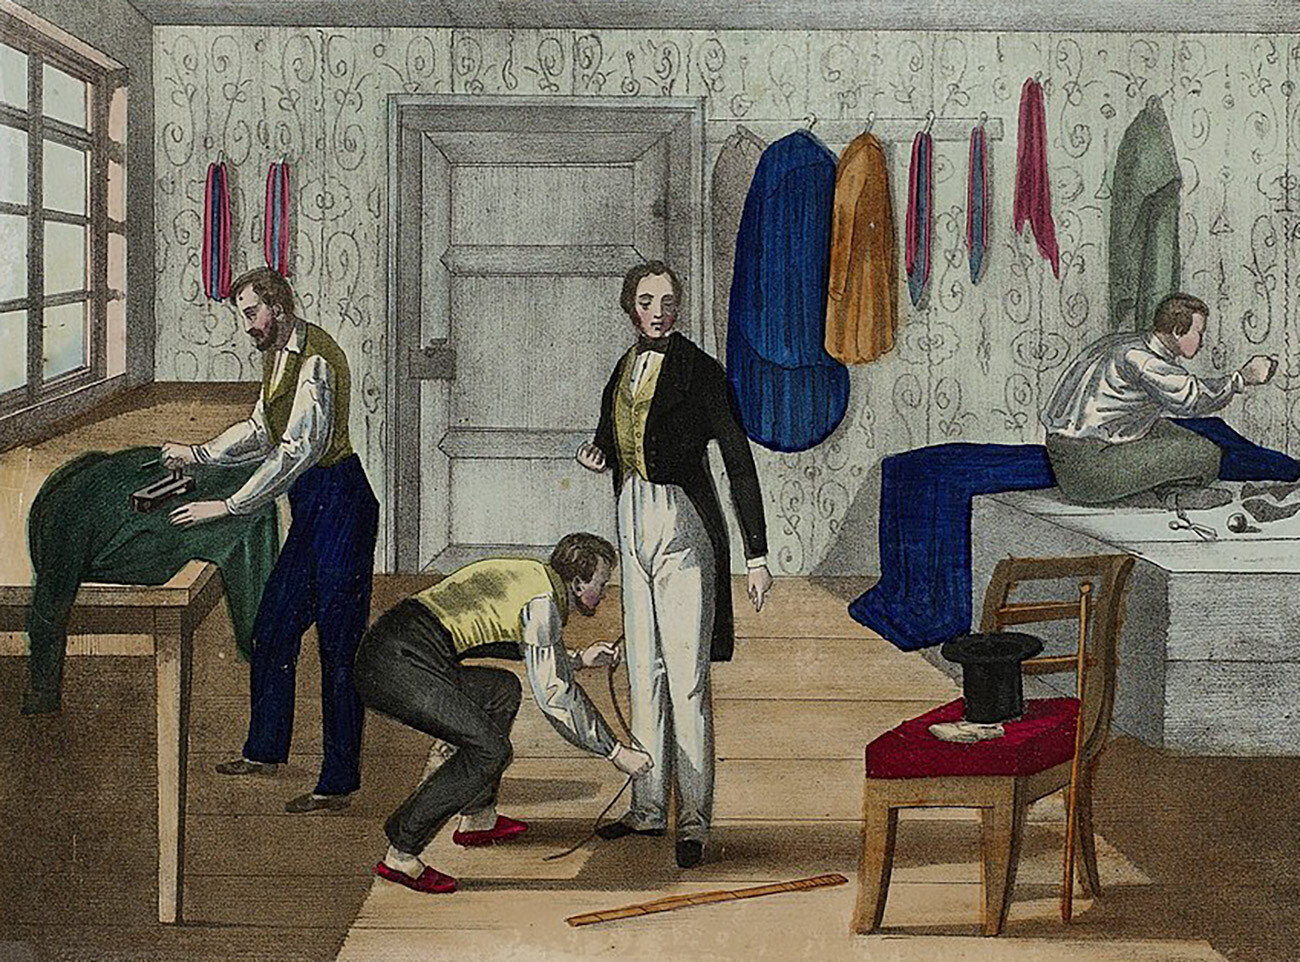 18th-century French tailors, an illustration